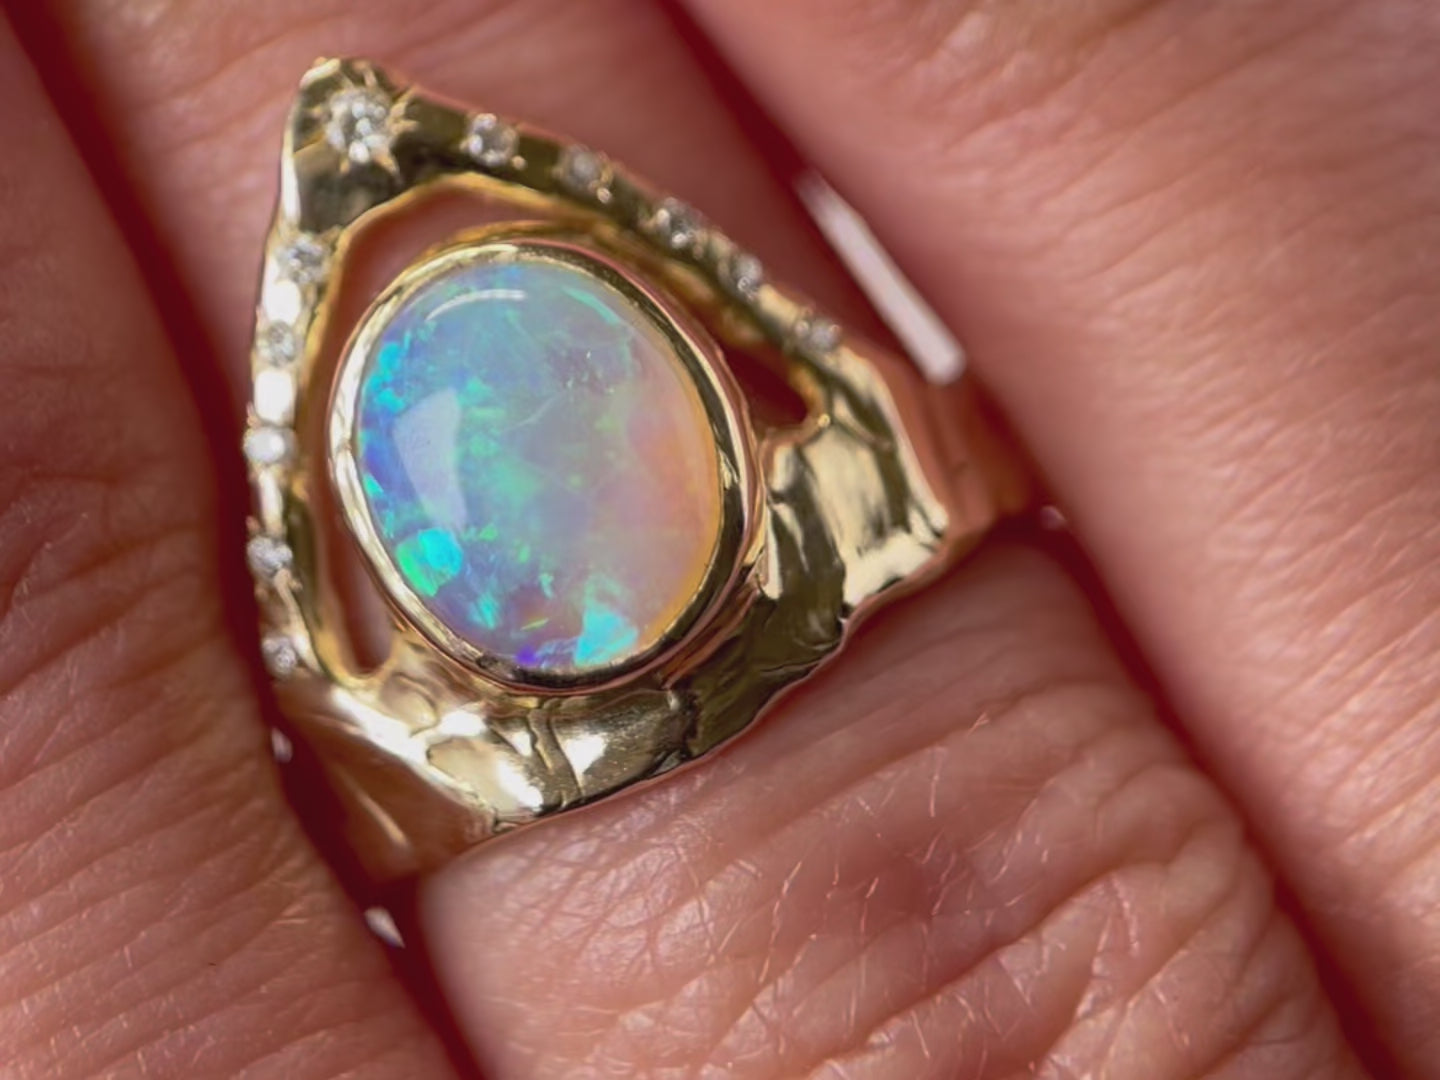 A close up video of a ring featuring a bezel-set opal on a wide, organically shaped band, adorned with a crown-like V-shaped band encircling the opal and embellished with glistening diamond accents